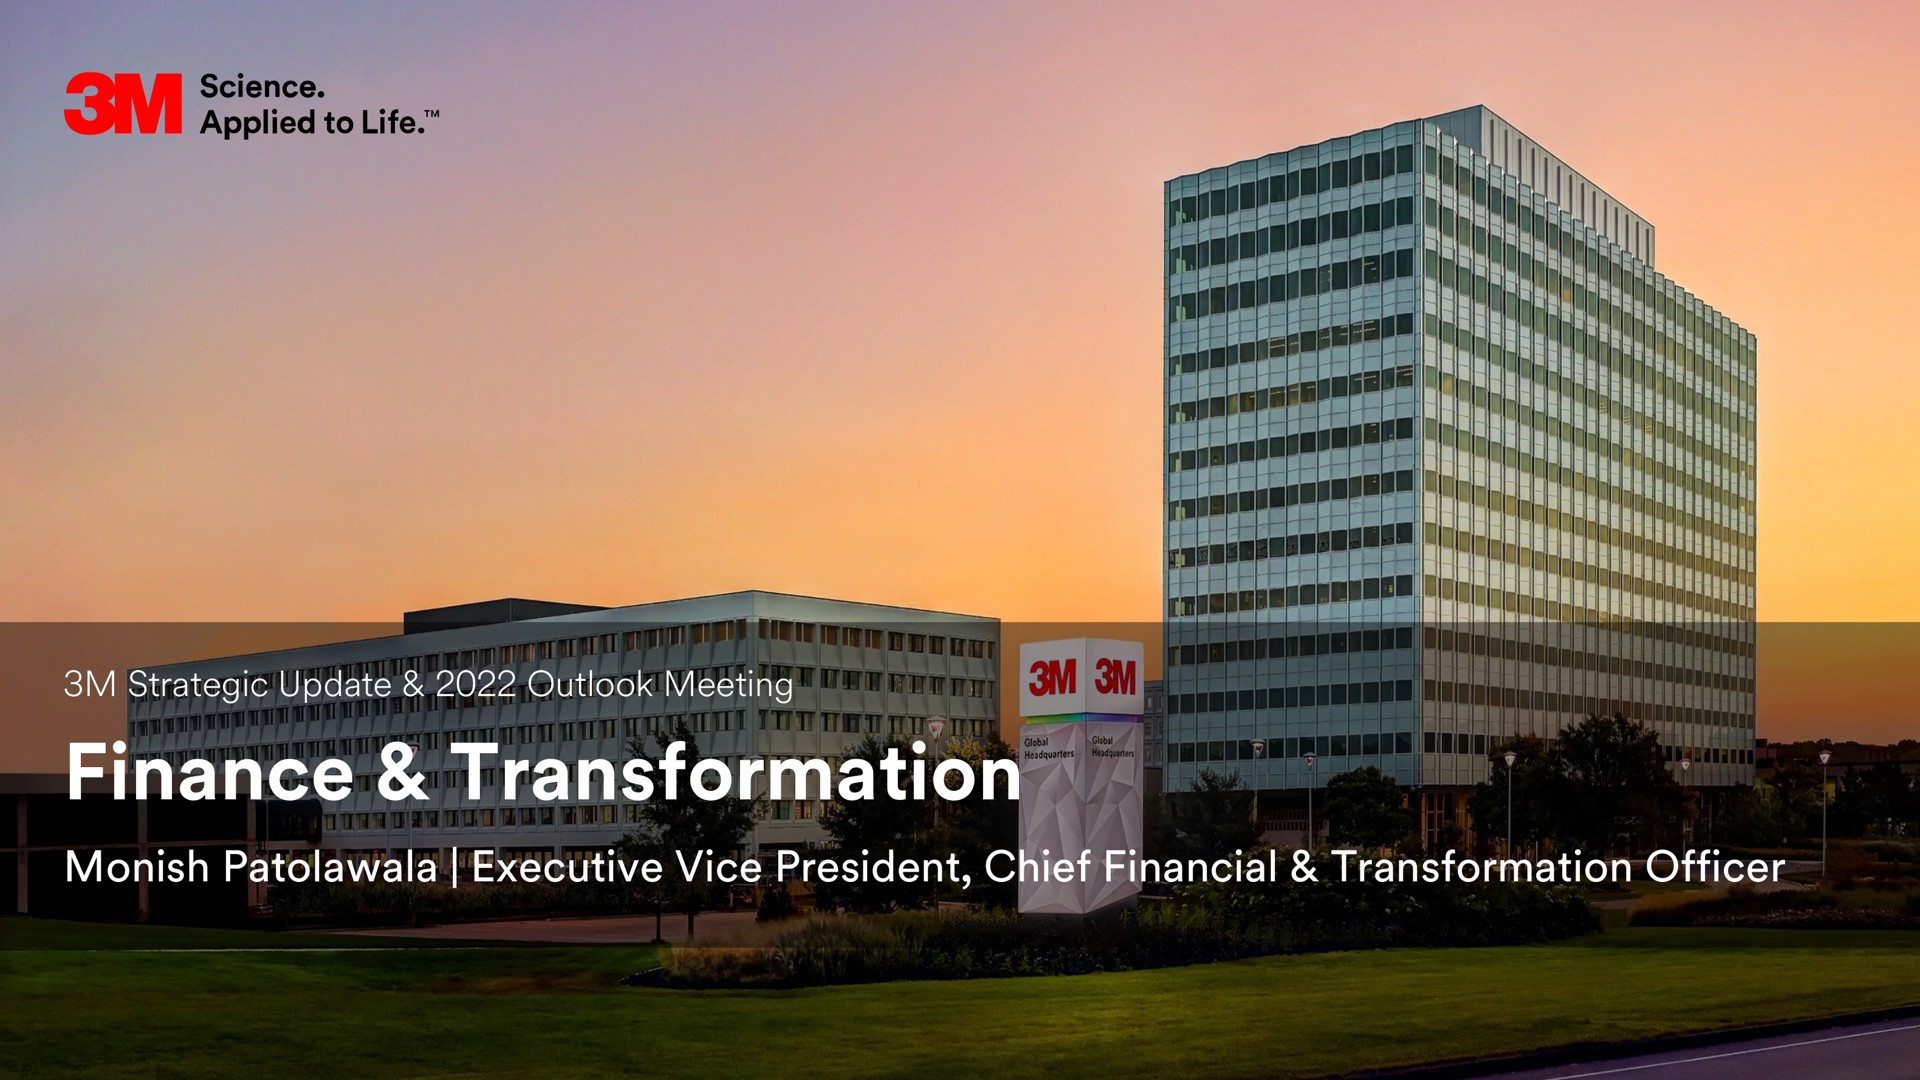 finance transformation executive vice president chief financial transformation officer | 3M